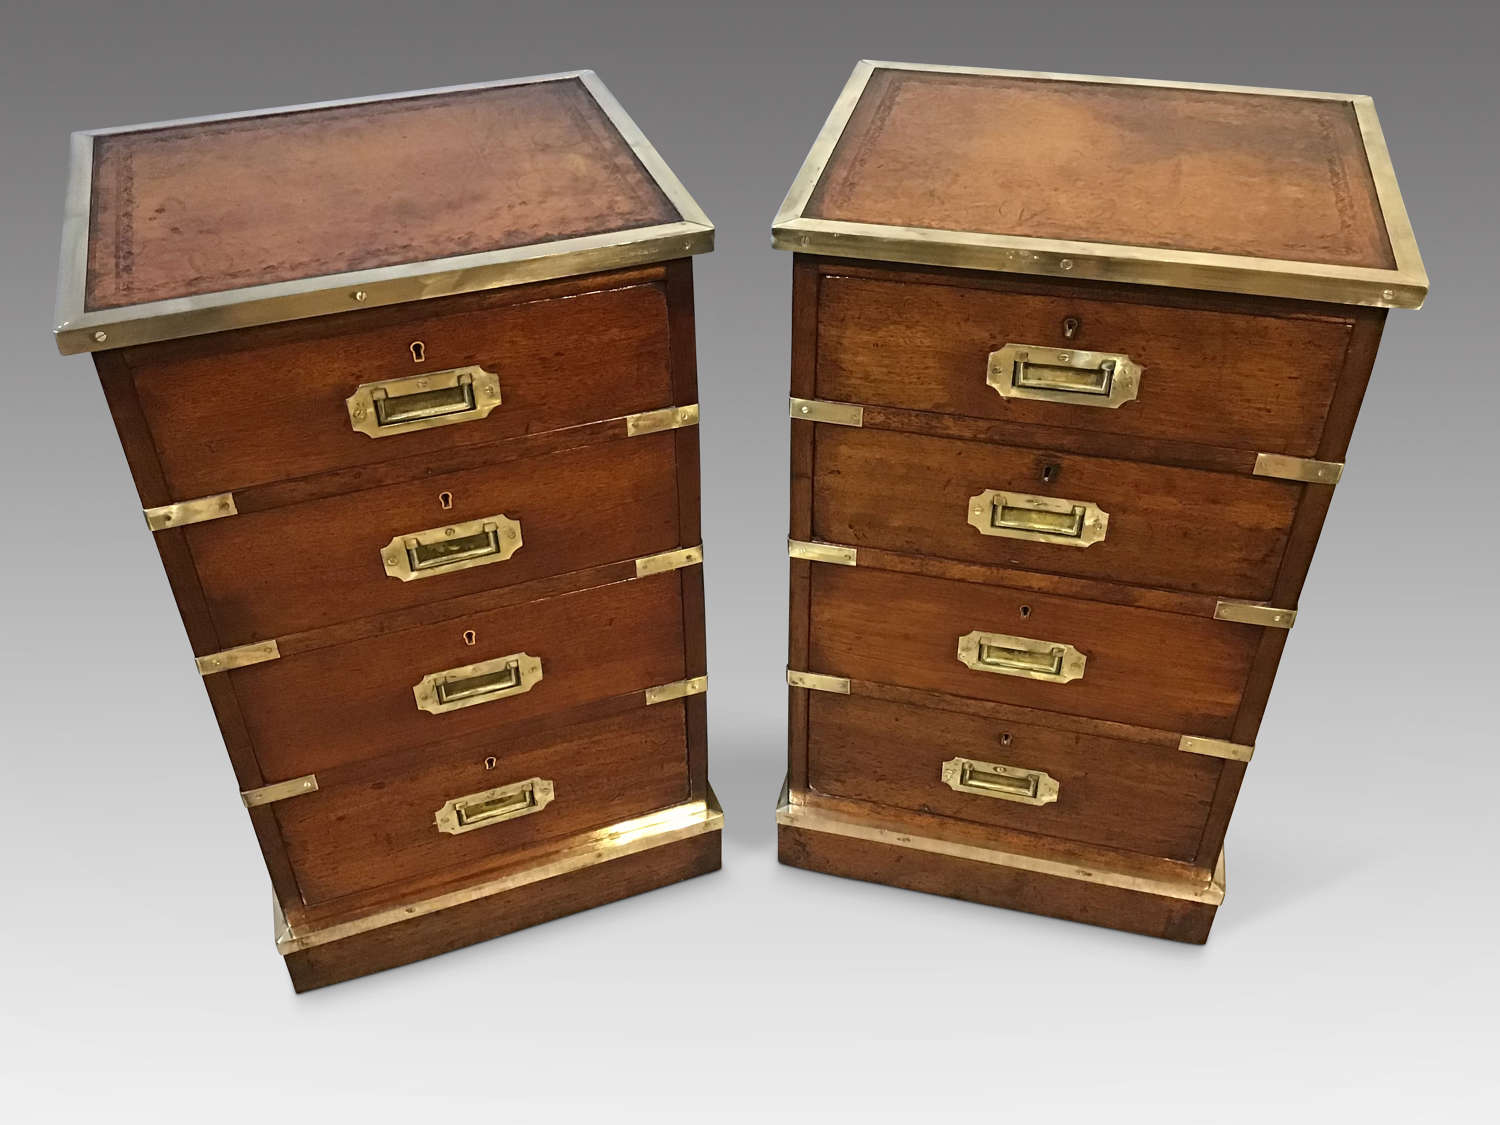 Pair of bedside chests